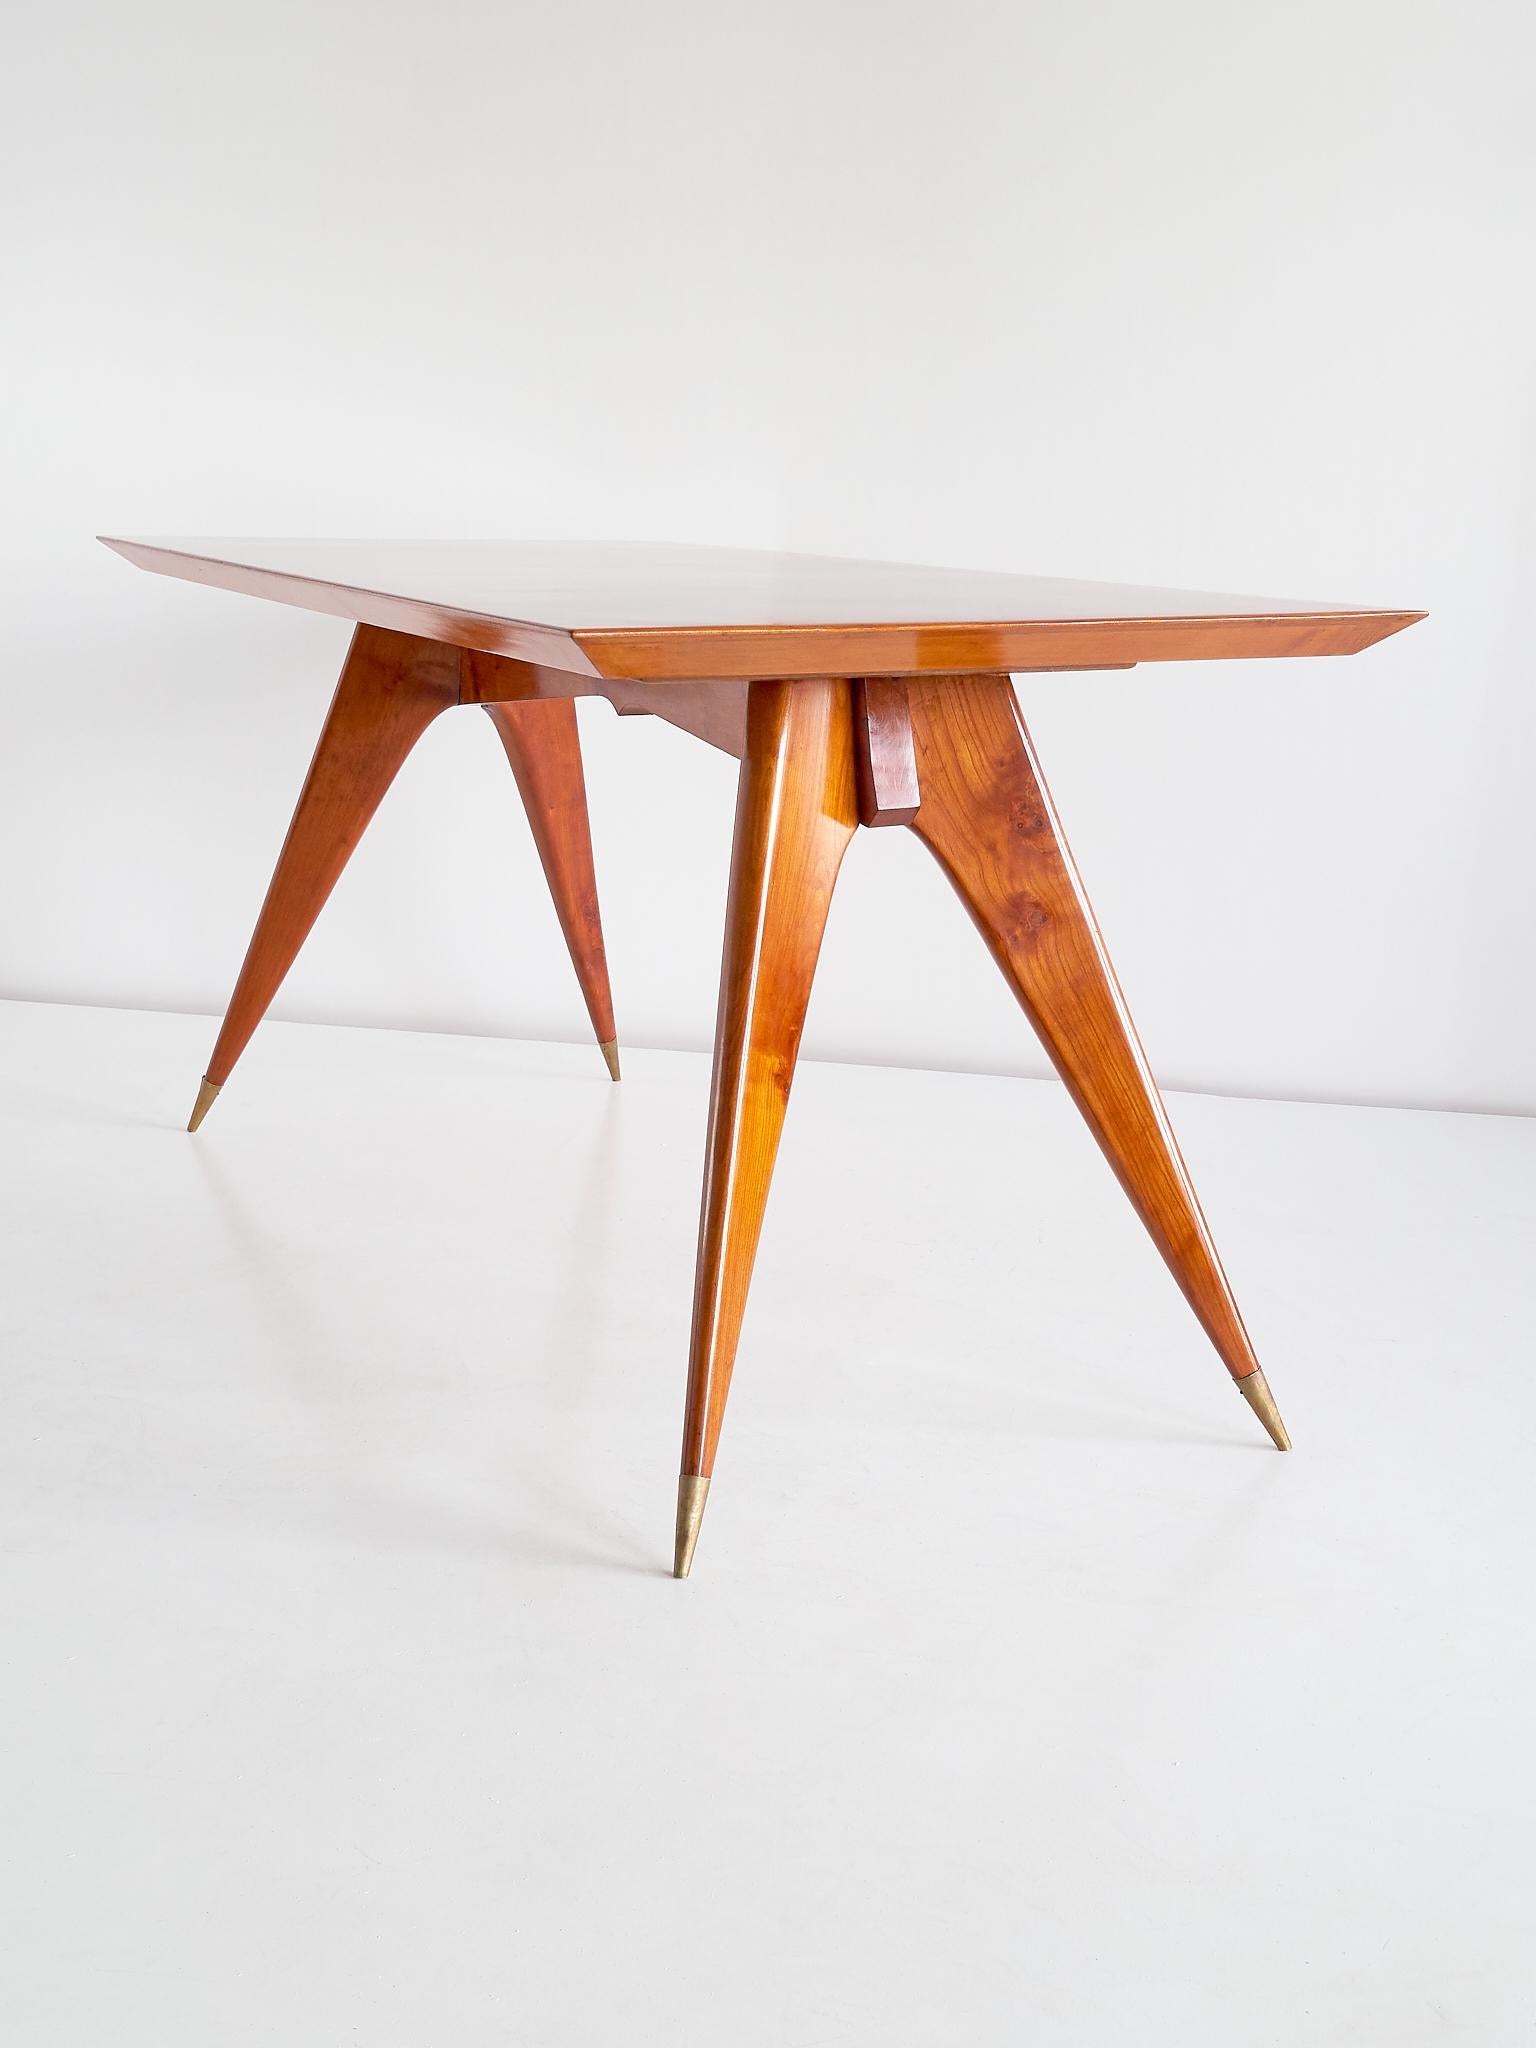 Italian Melchiorre Bega Dining Table in Walnut and Brass, Italy, Early 1950s